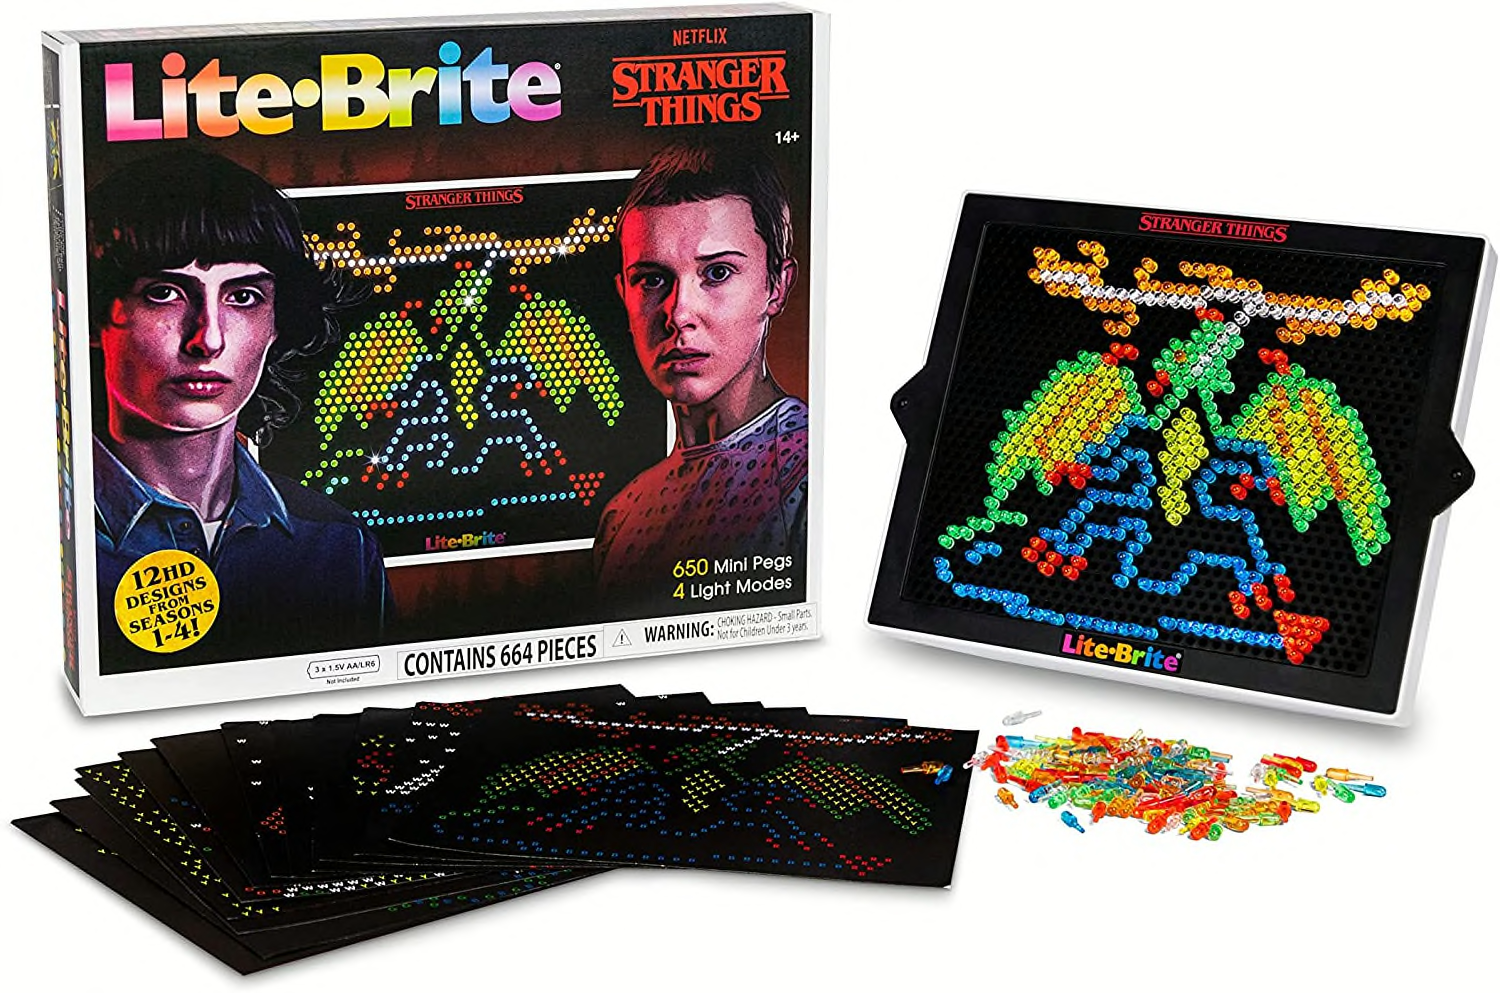 Get the special edition LiteBrite toy used in Stranger Things season 4